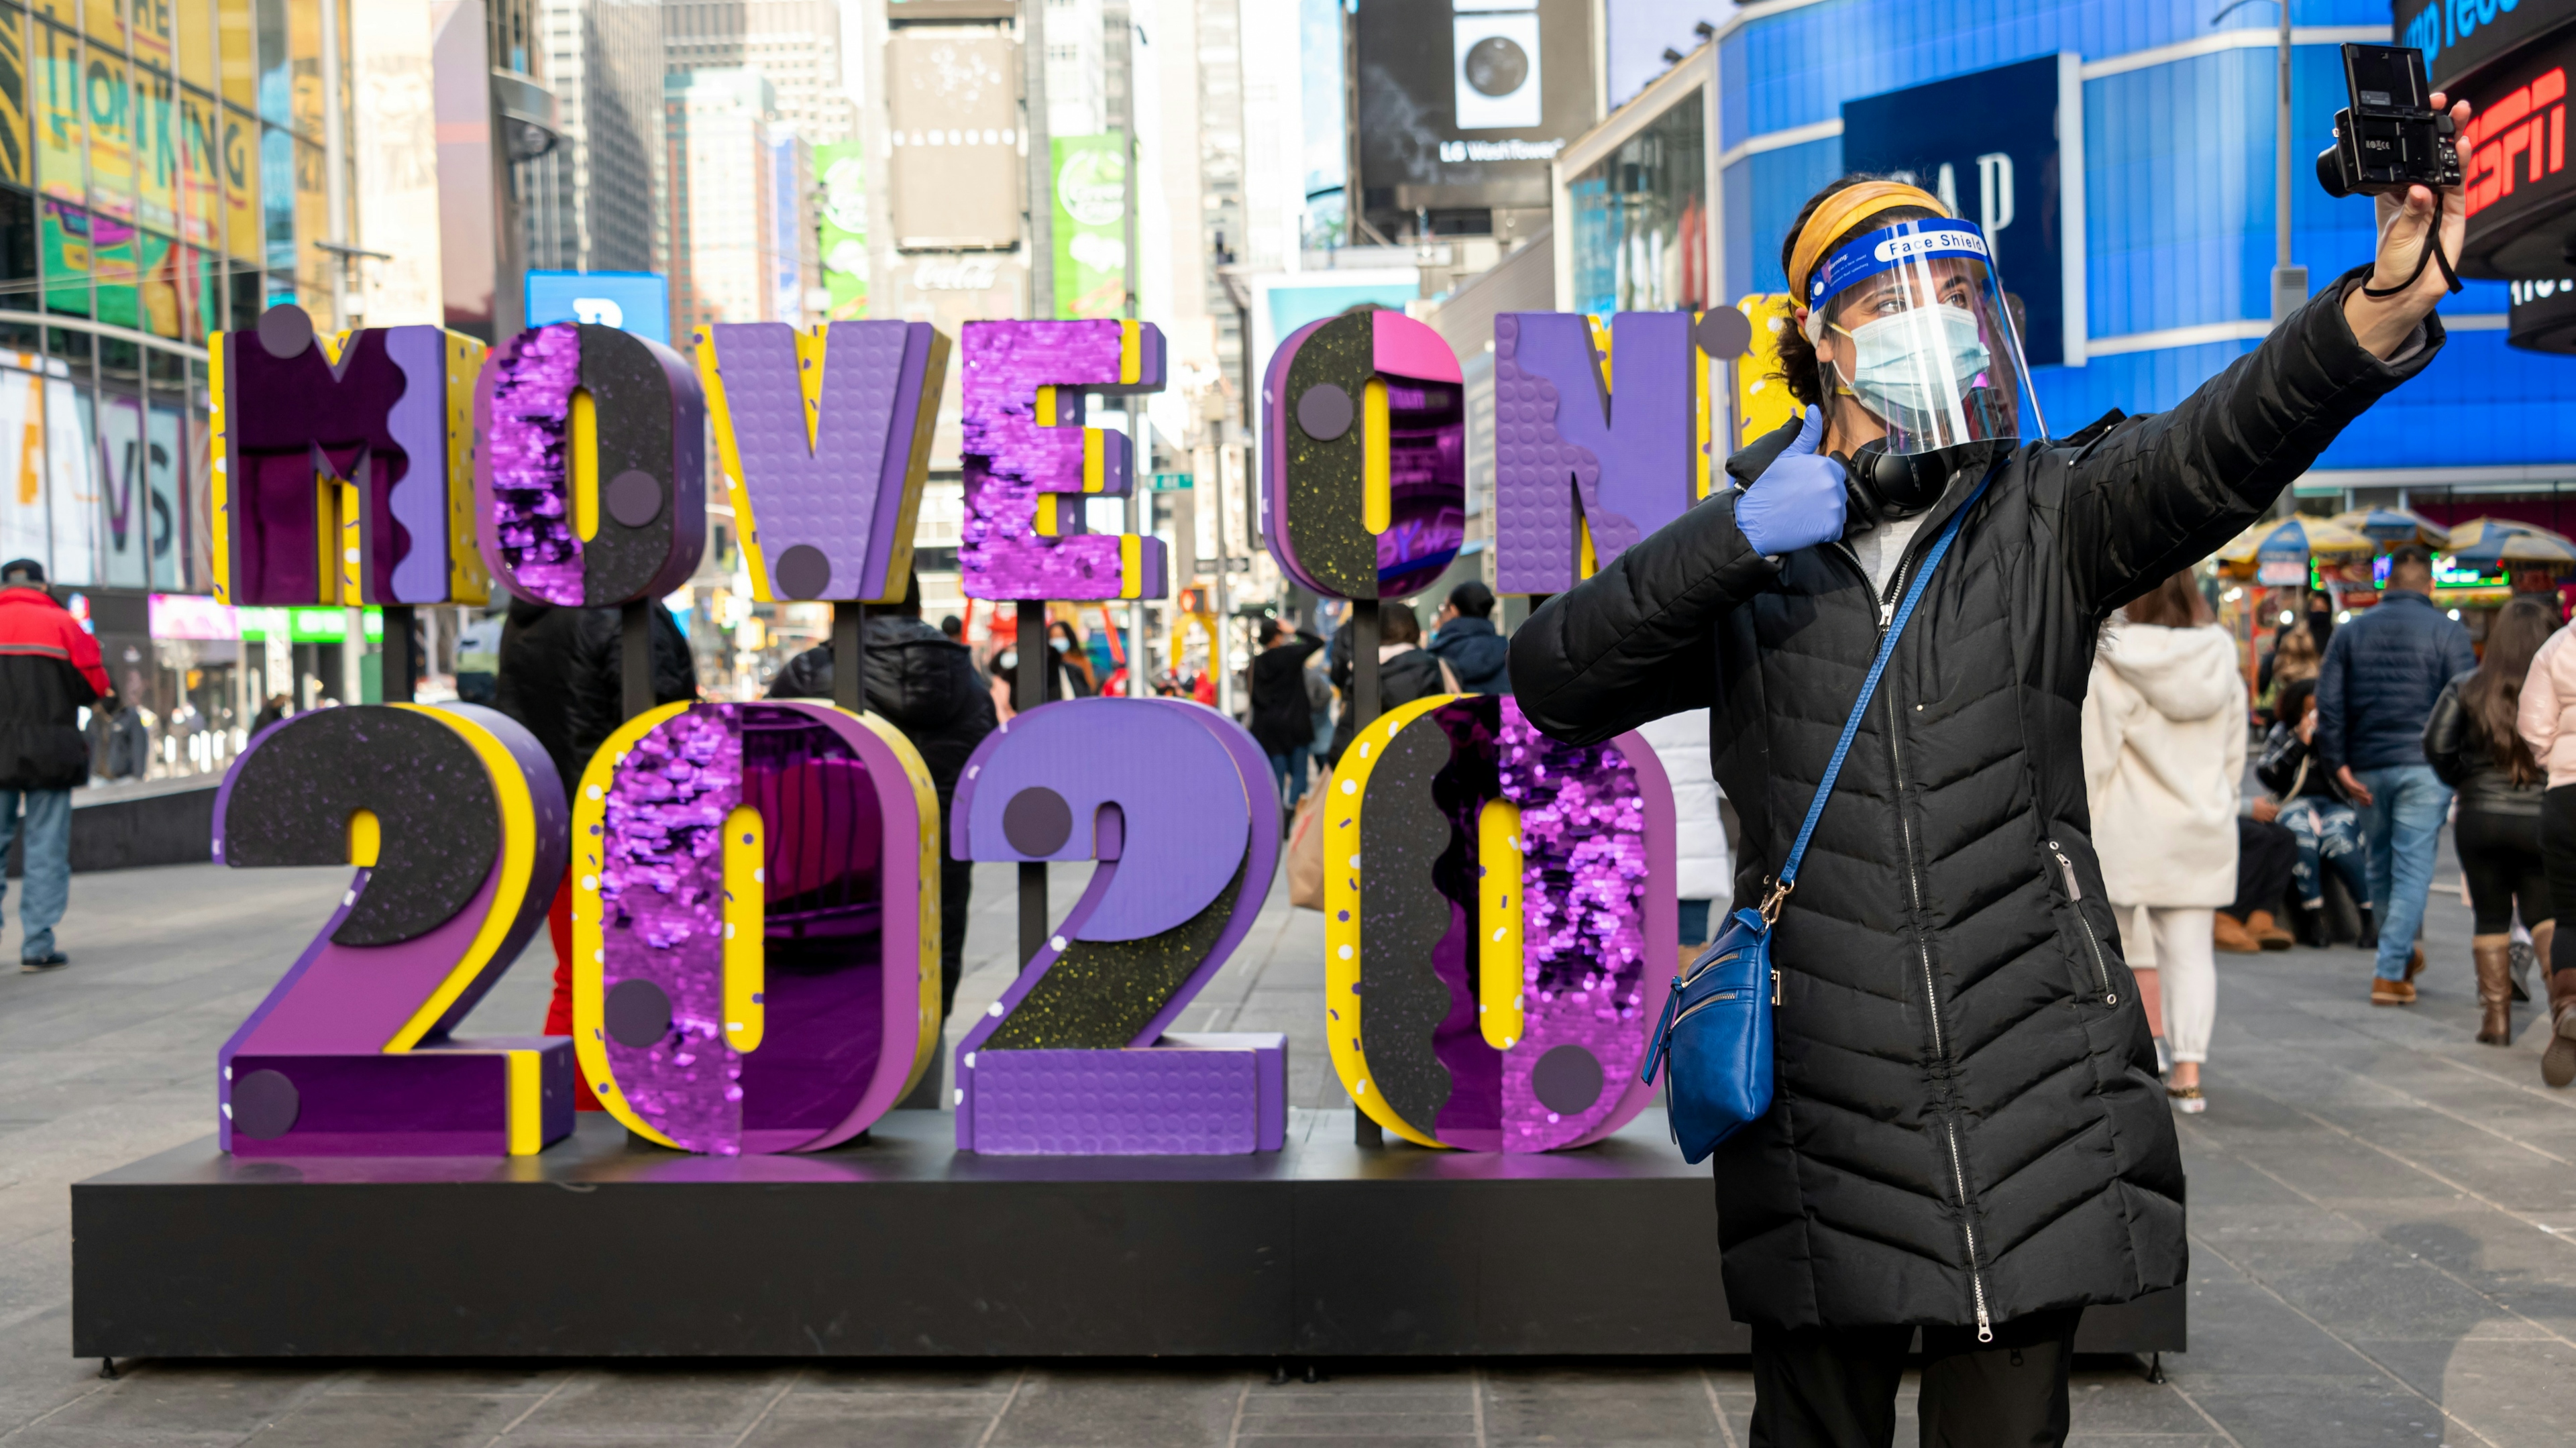 Woman stands in front of sign that says "Move On 2020" in Times Square.